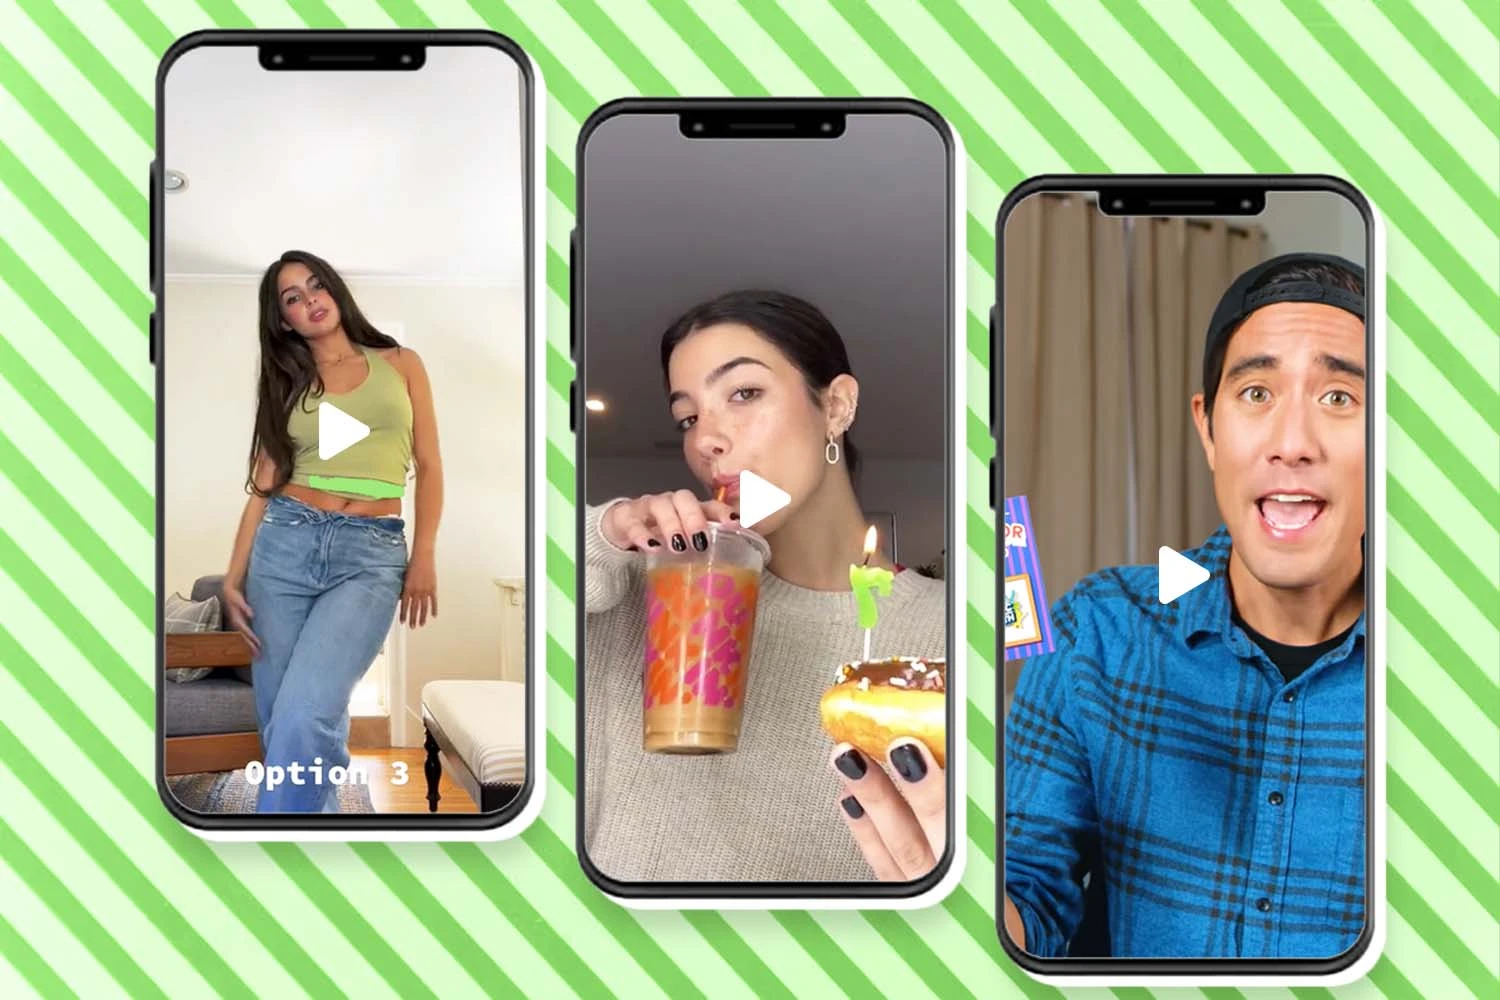 Videos of the three Influencers for their Influencer marketing campaign collaborations.